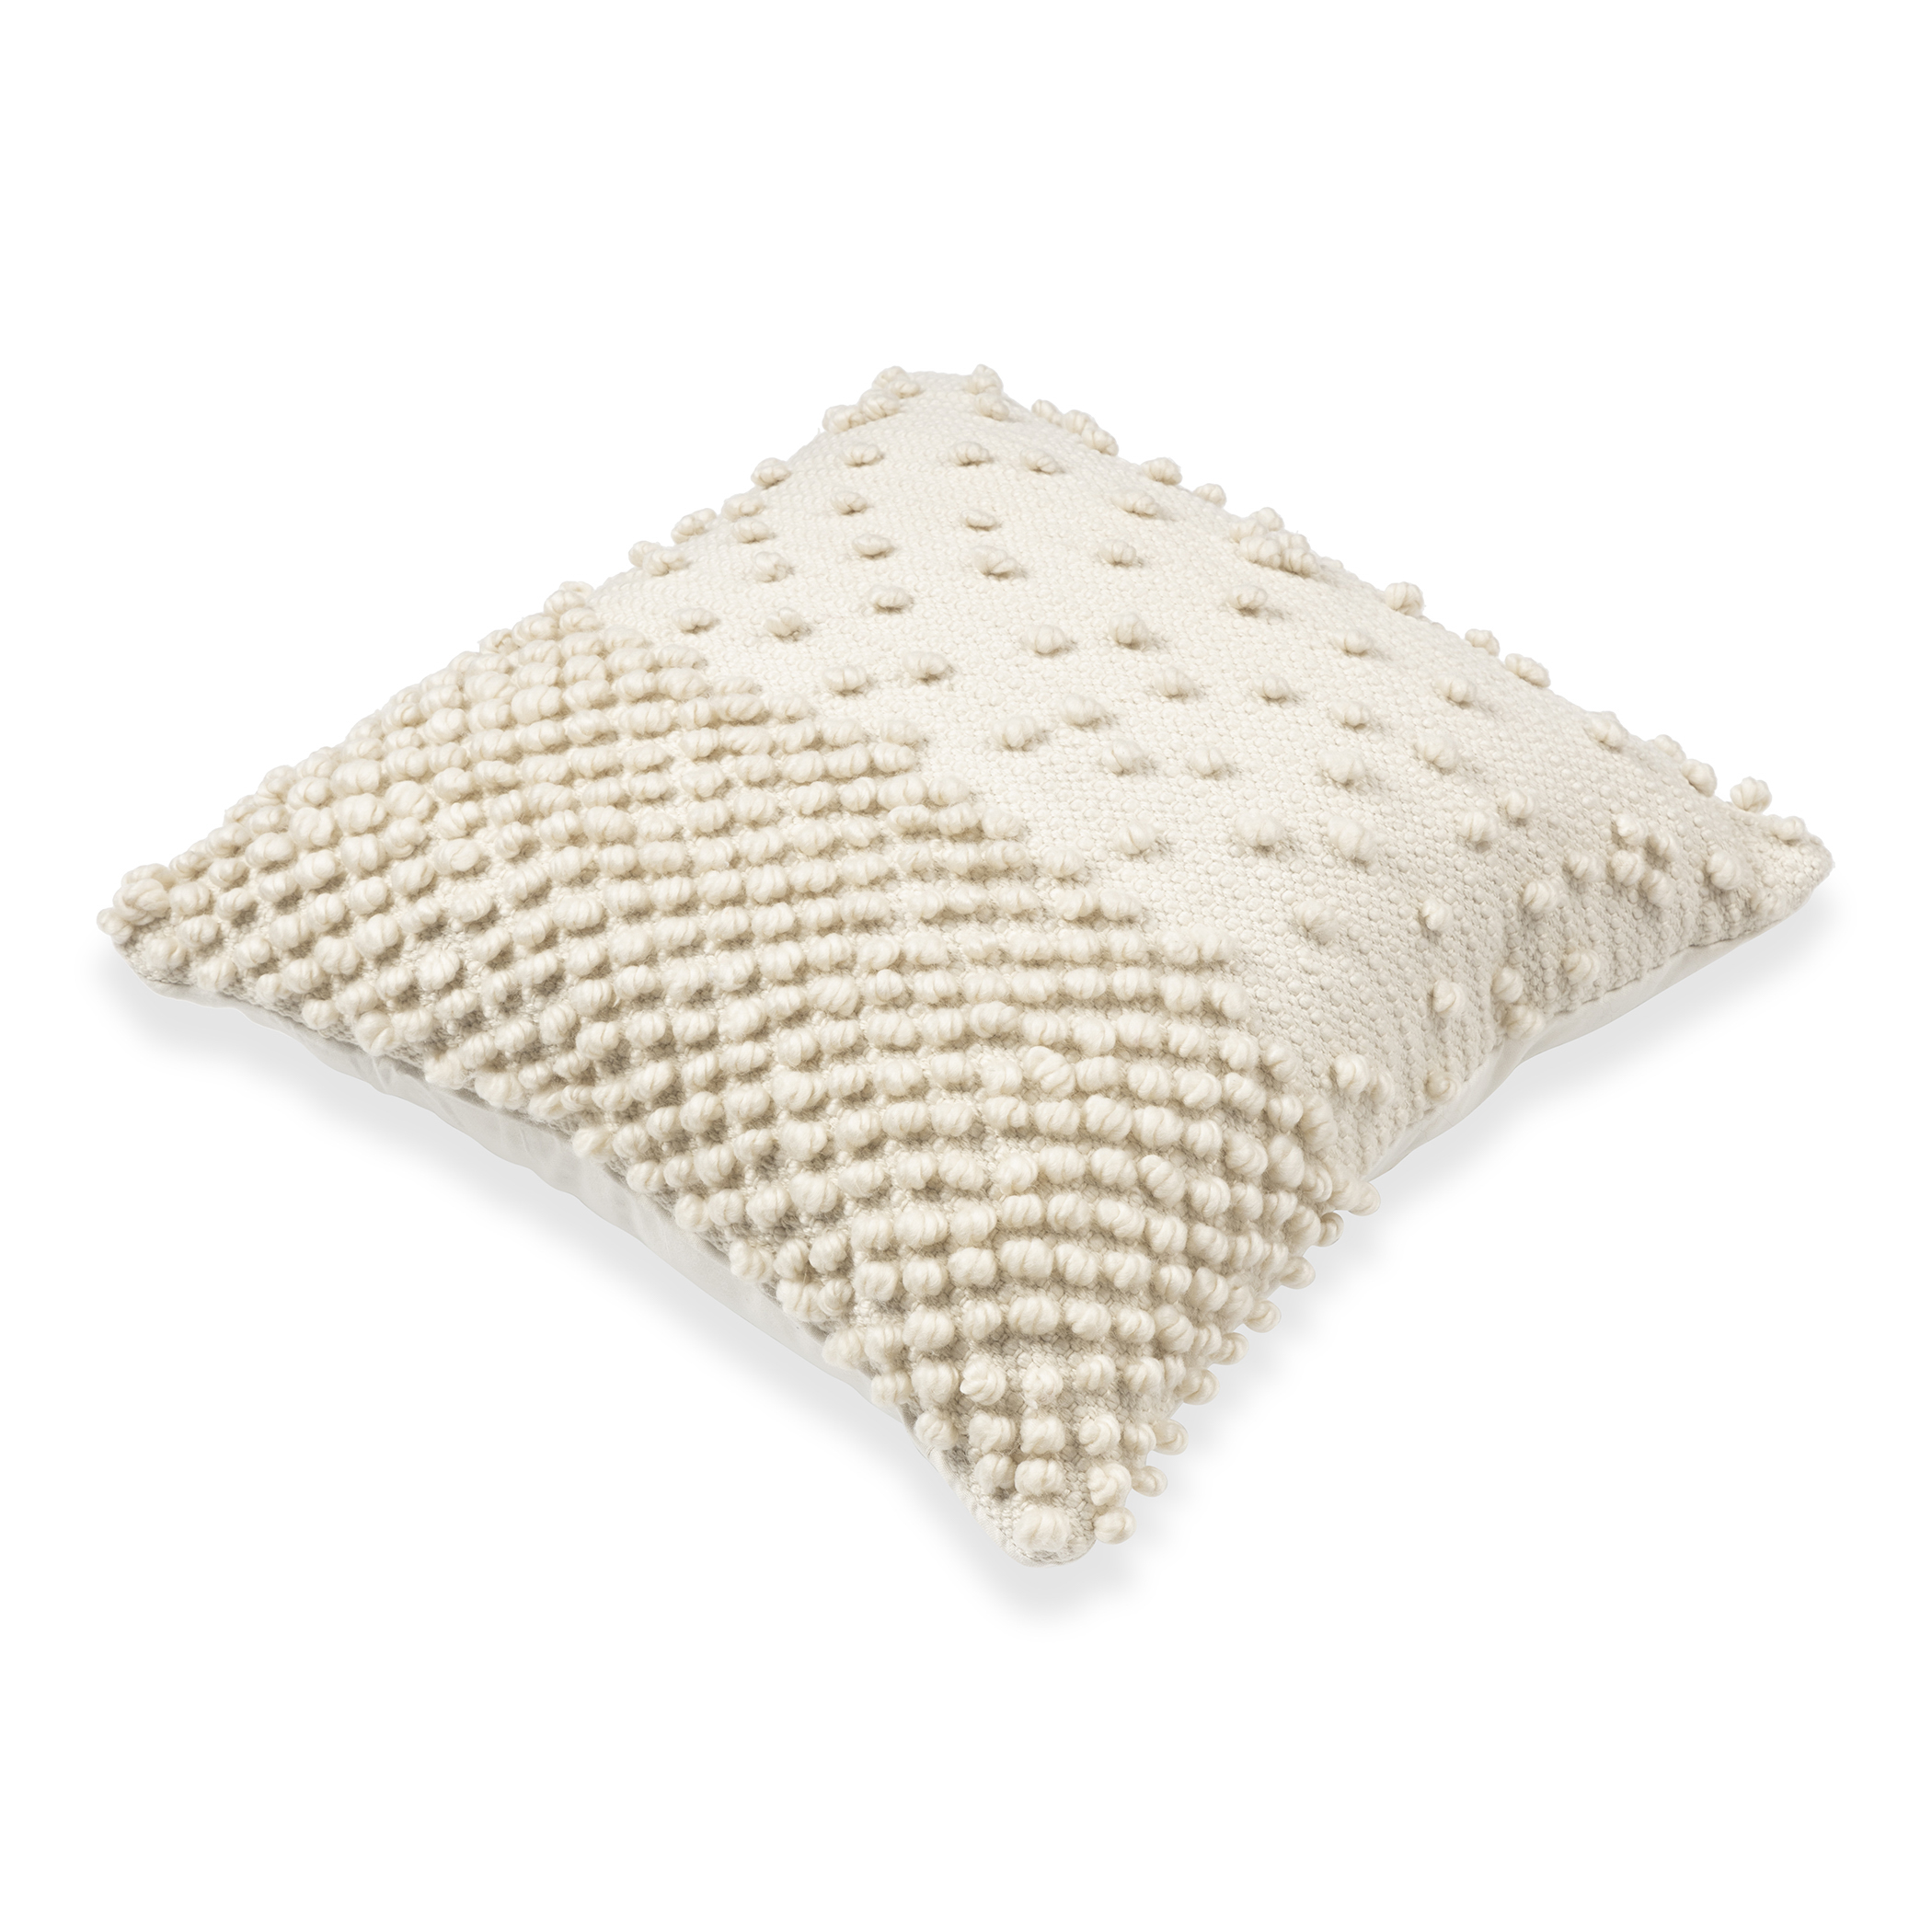 Better Homes & Gardens Knots Pillow, 21" x 21" inch Square, Off White - image 4 of 5